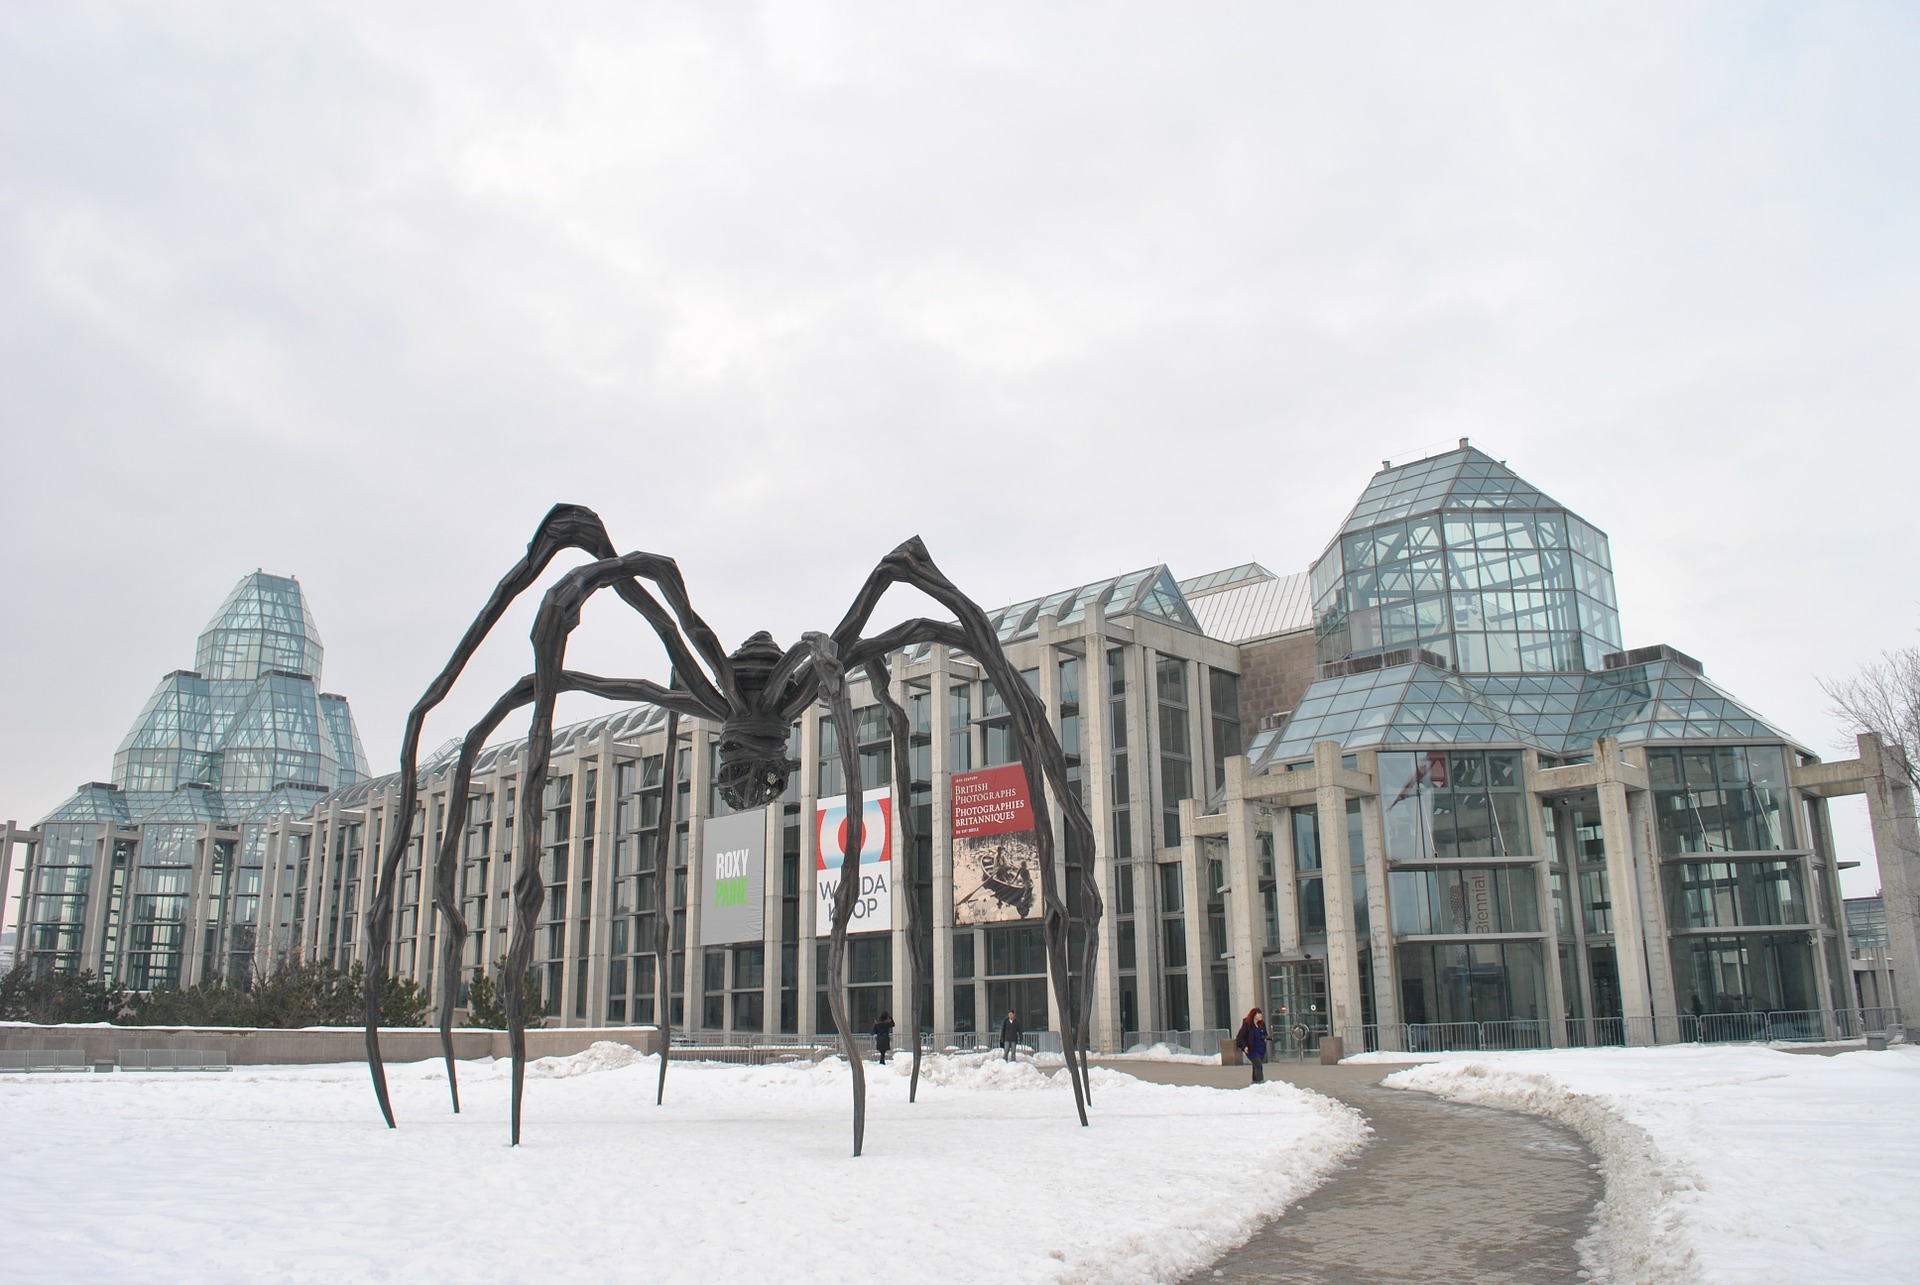 Maman statue and the National Gallery of Canada, Ottawa